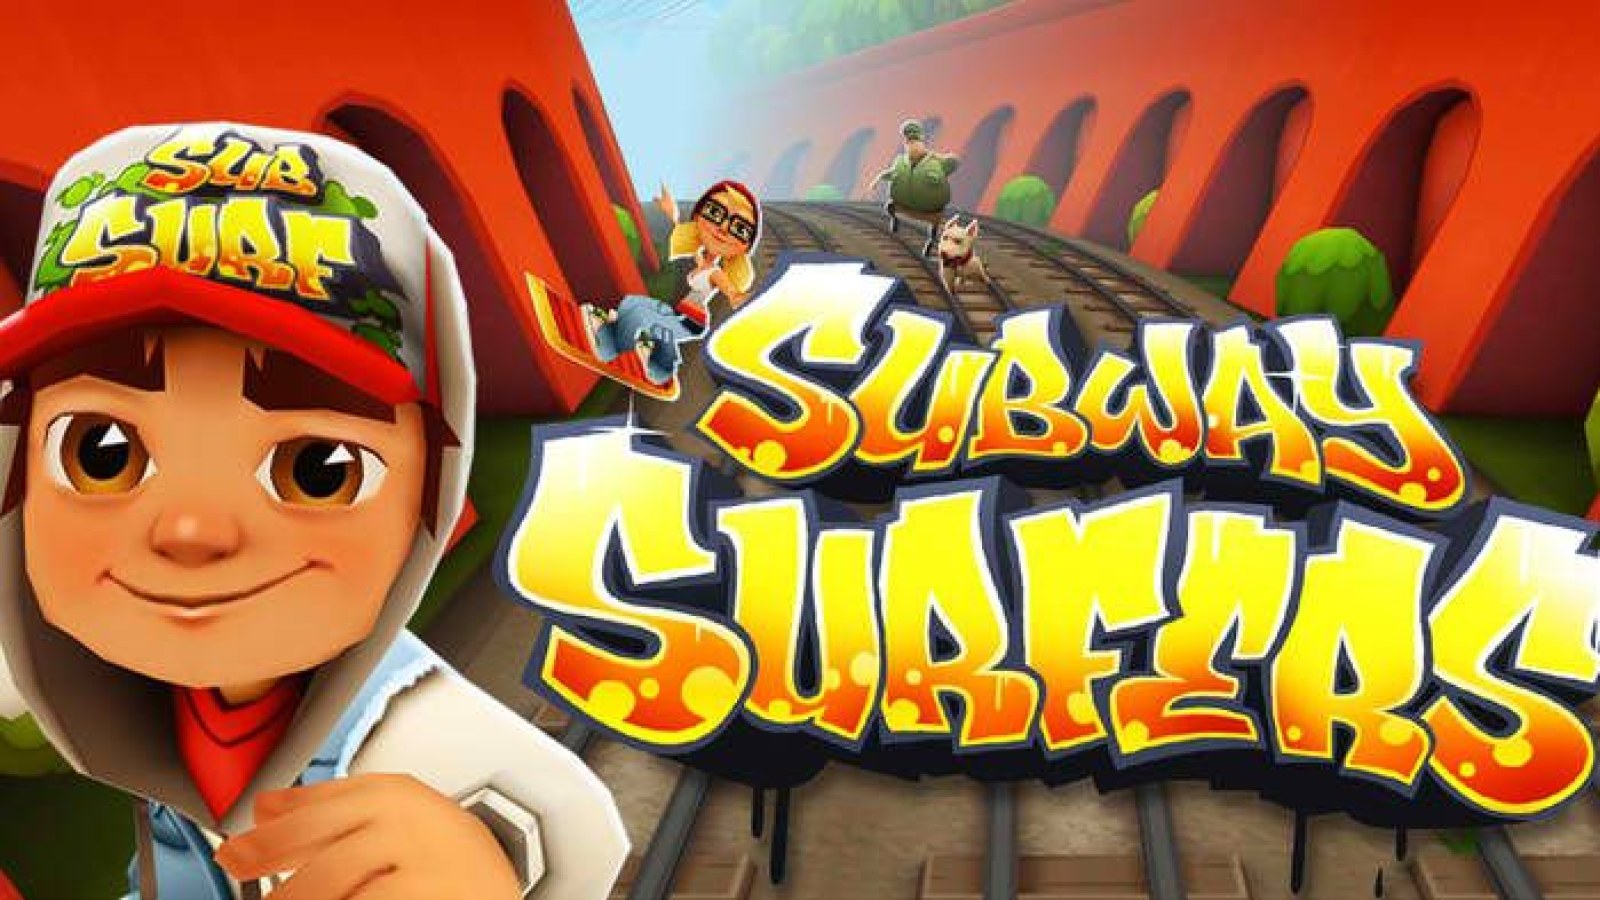 Subway Surfers still gets 30 million downloads a month 5 years after launch